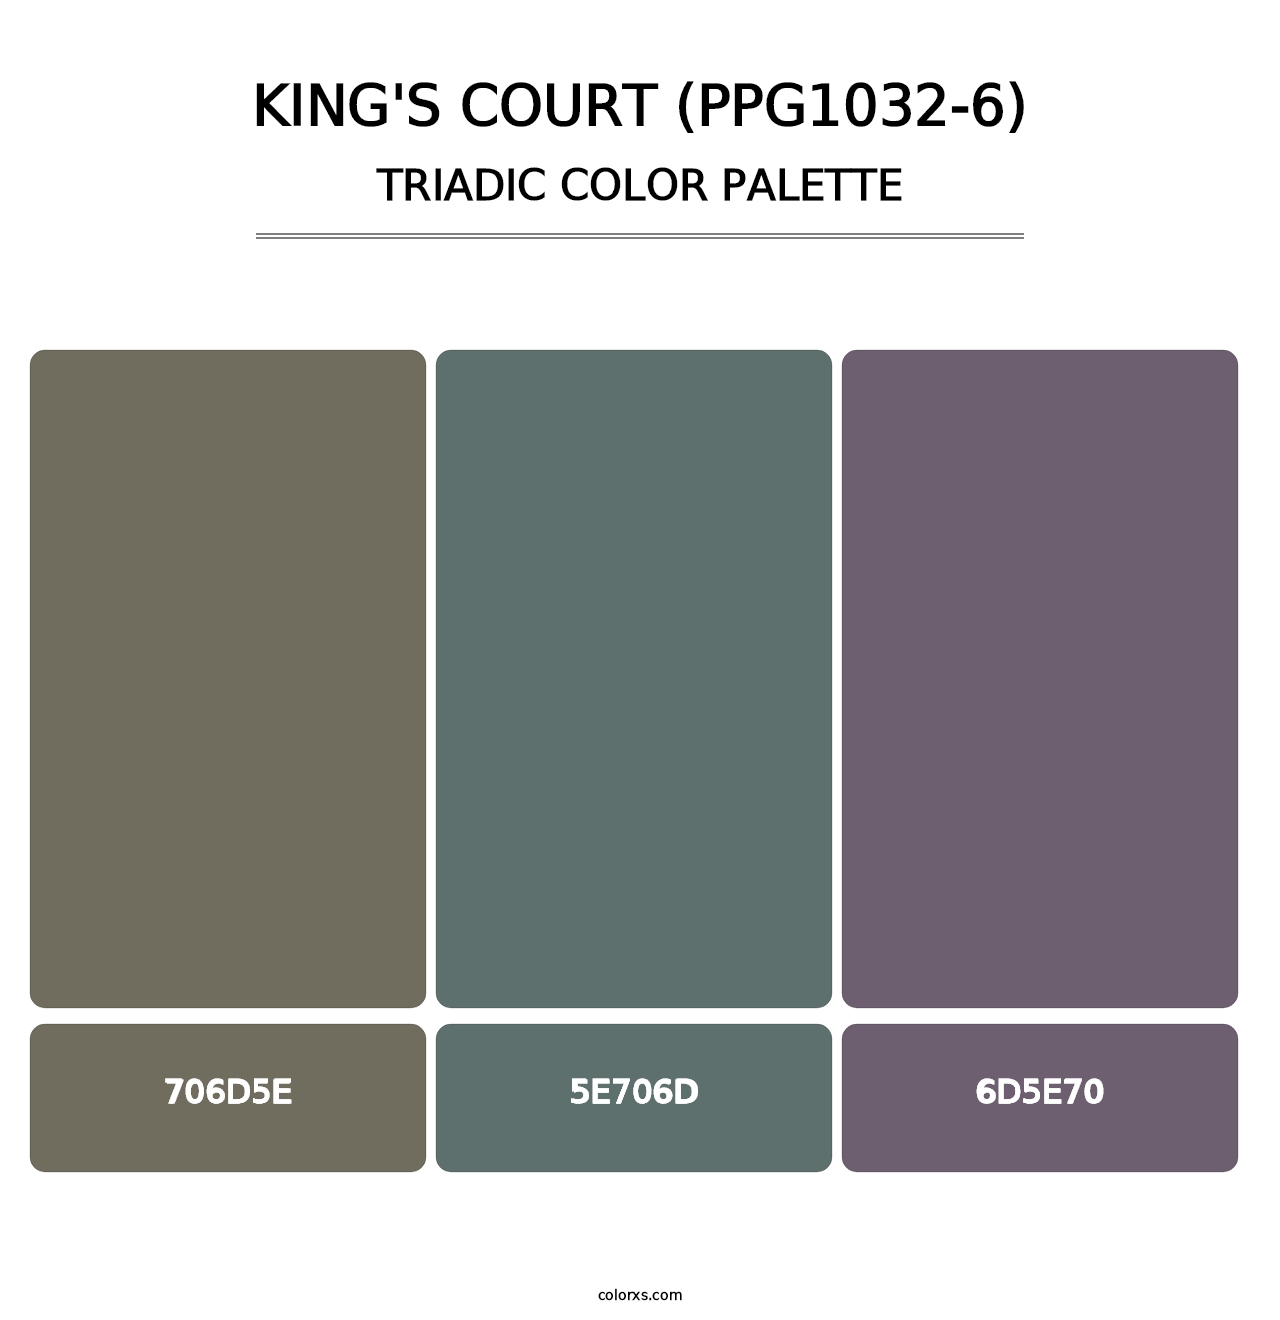 King's Court (PPG1032-6) - Triadic Color Palette